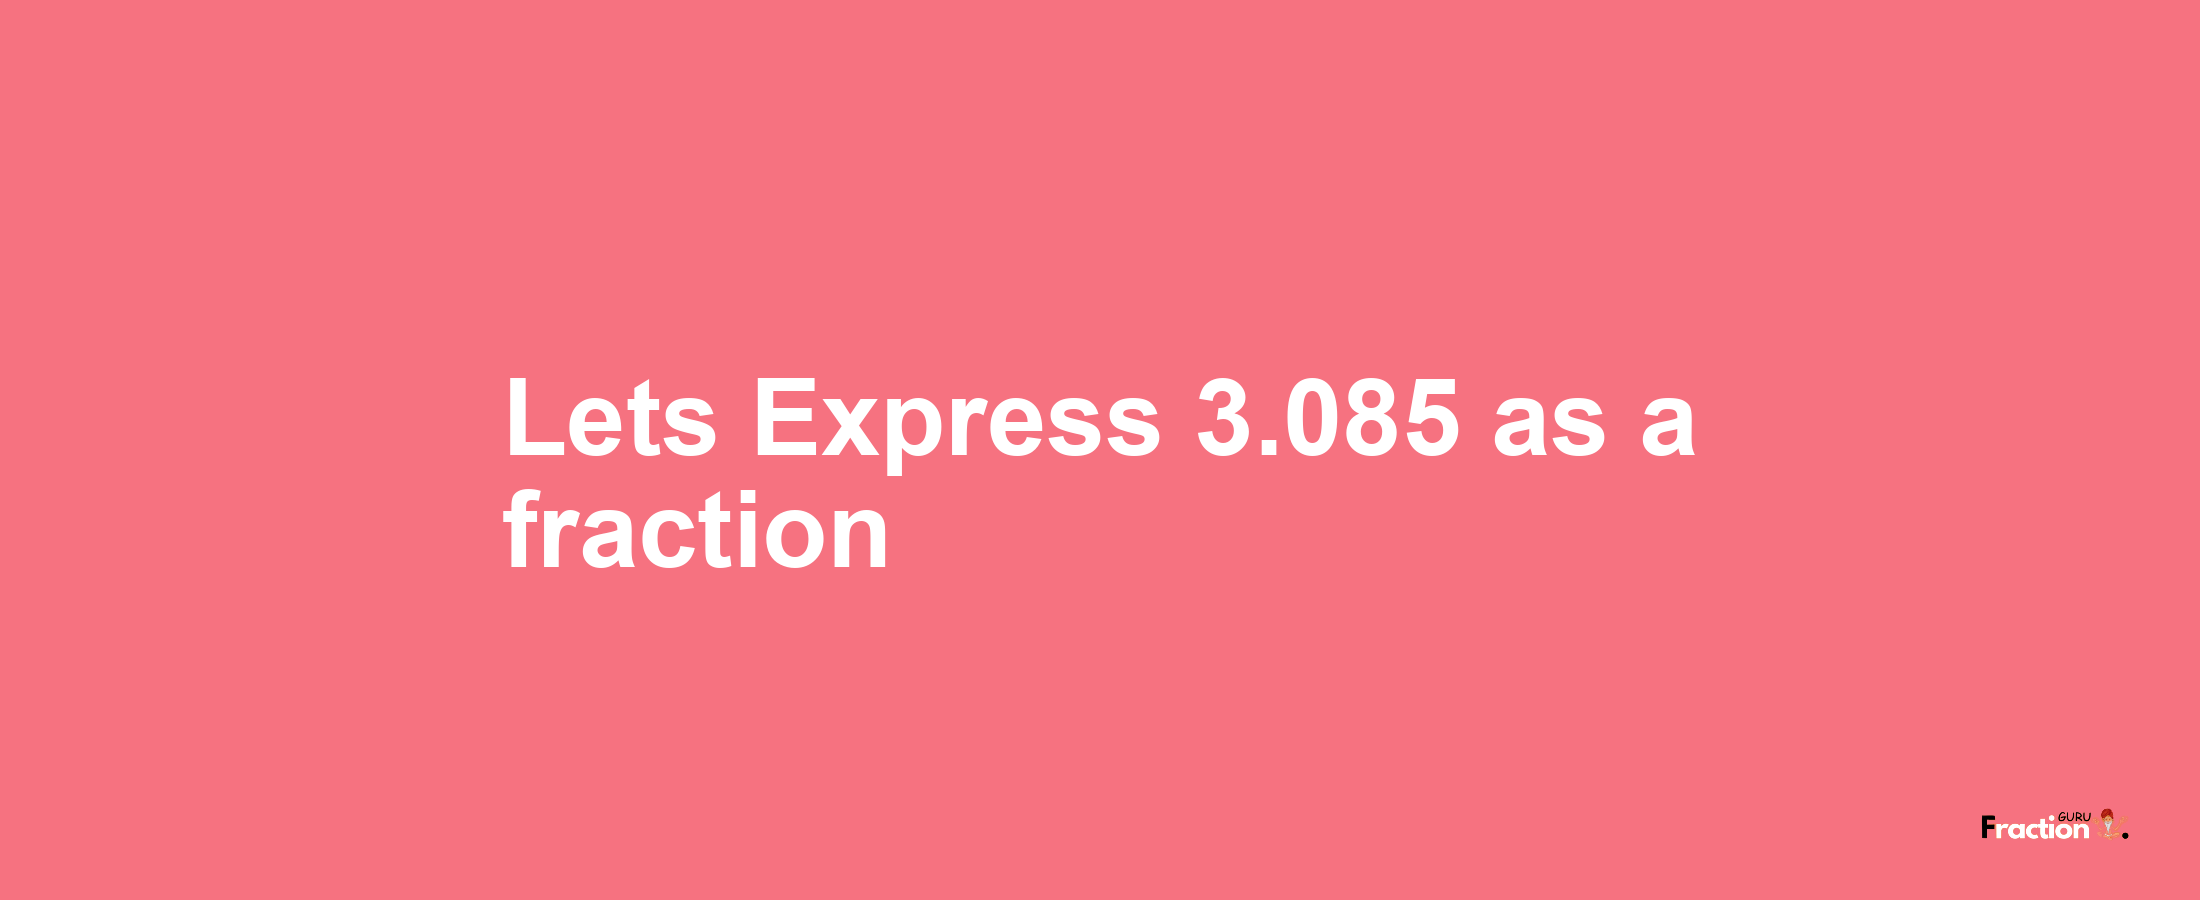 Lets Express 3.085 as afraction